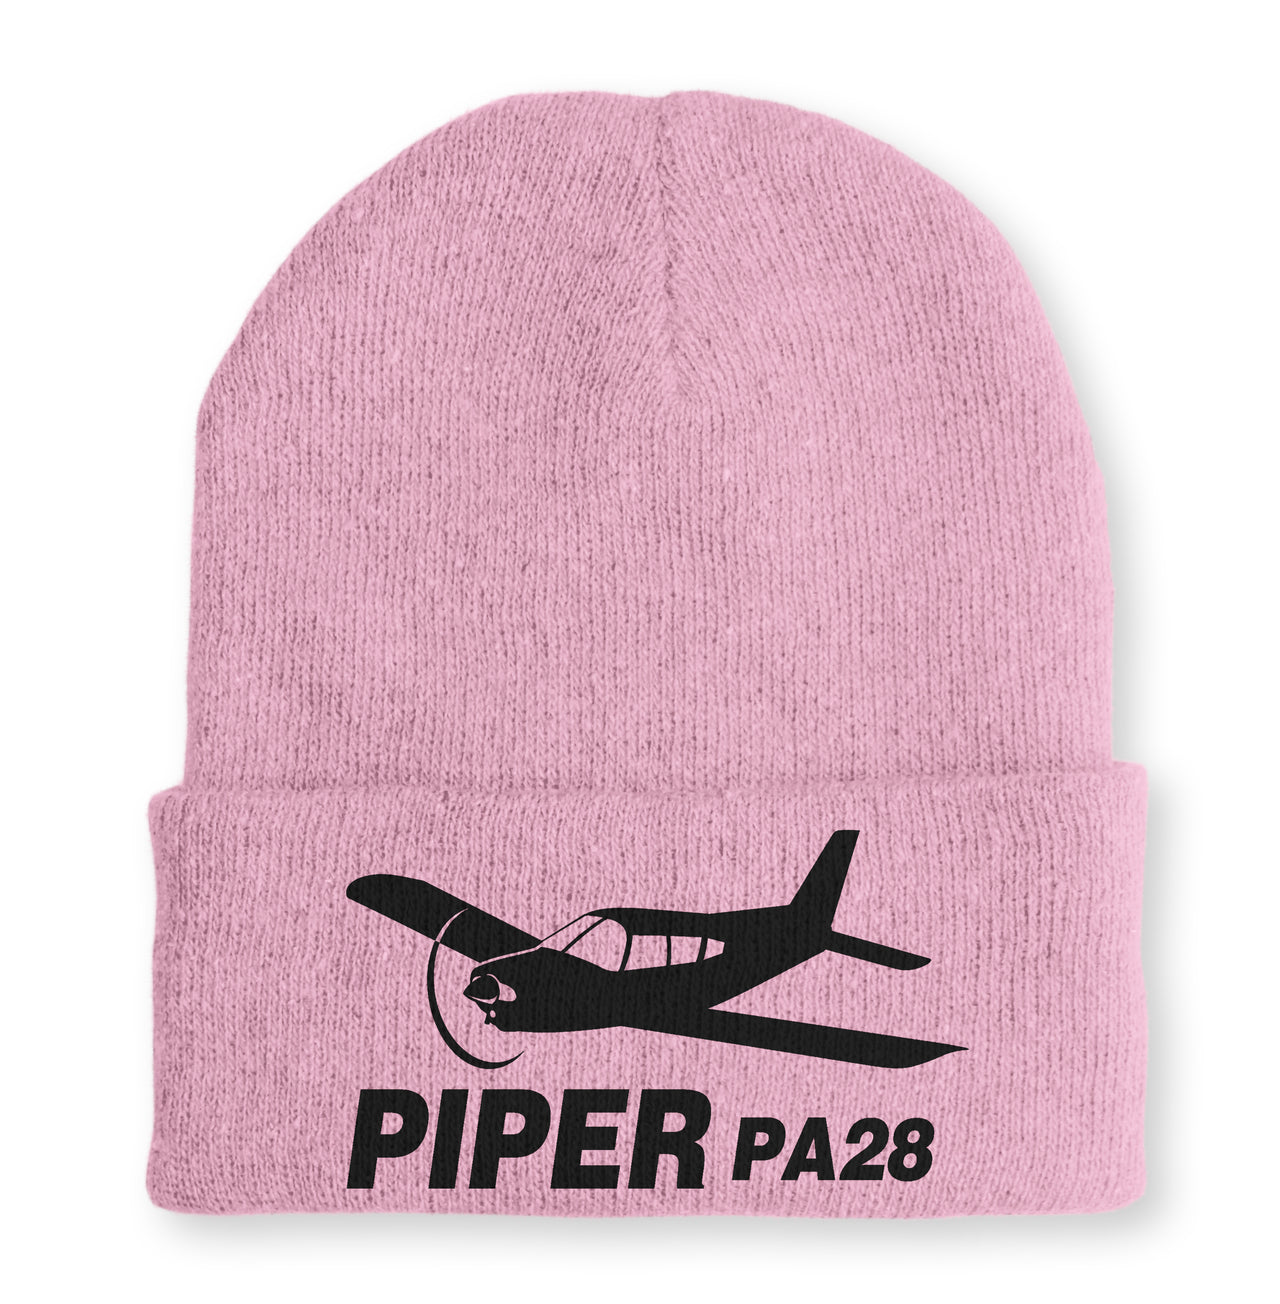 The Piper PA28 Embroidered Beanies